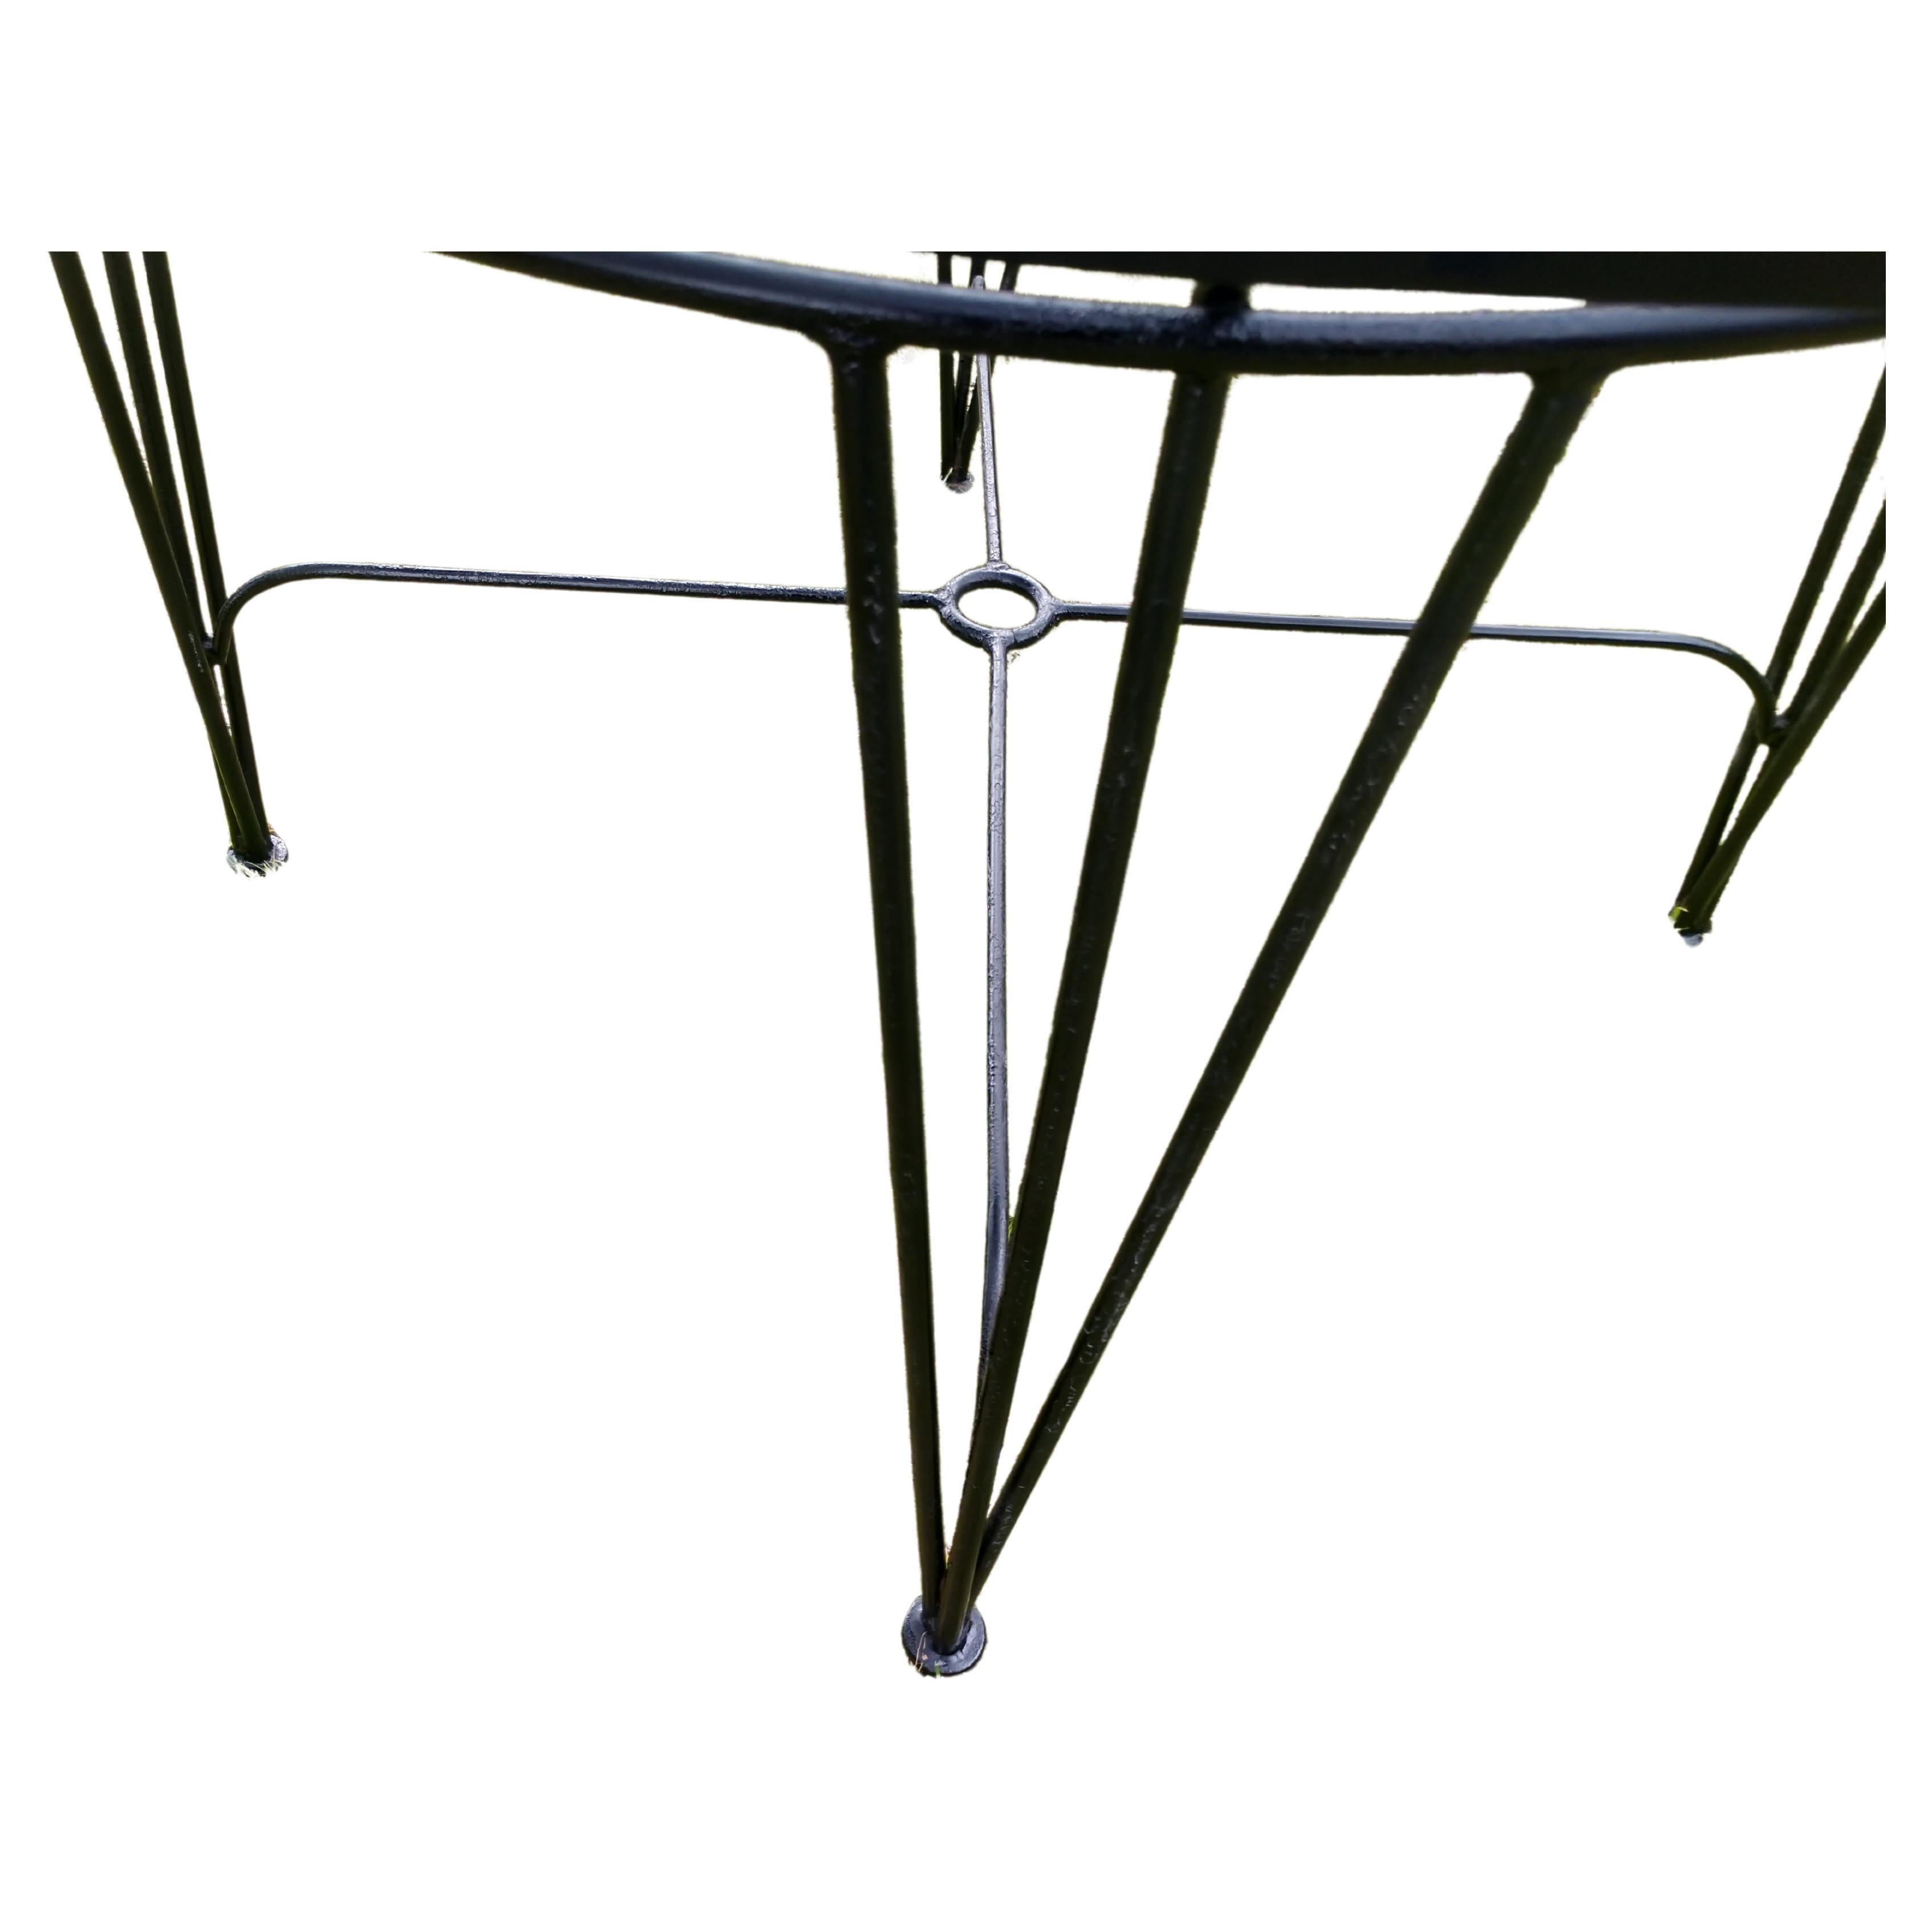 Fabulous patio dining table with mesh top outfitted with a fitting for an umbrella. Hand made in the fifties with galvanized iron. Recently enameled in satin black. Very sturdy.